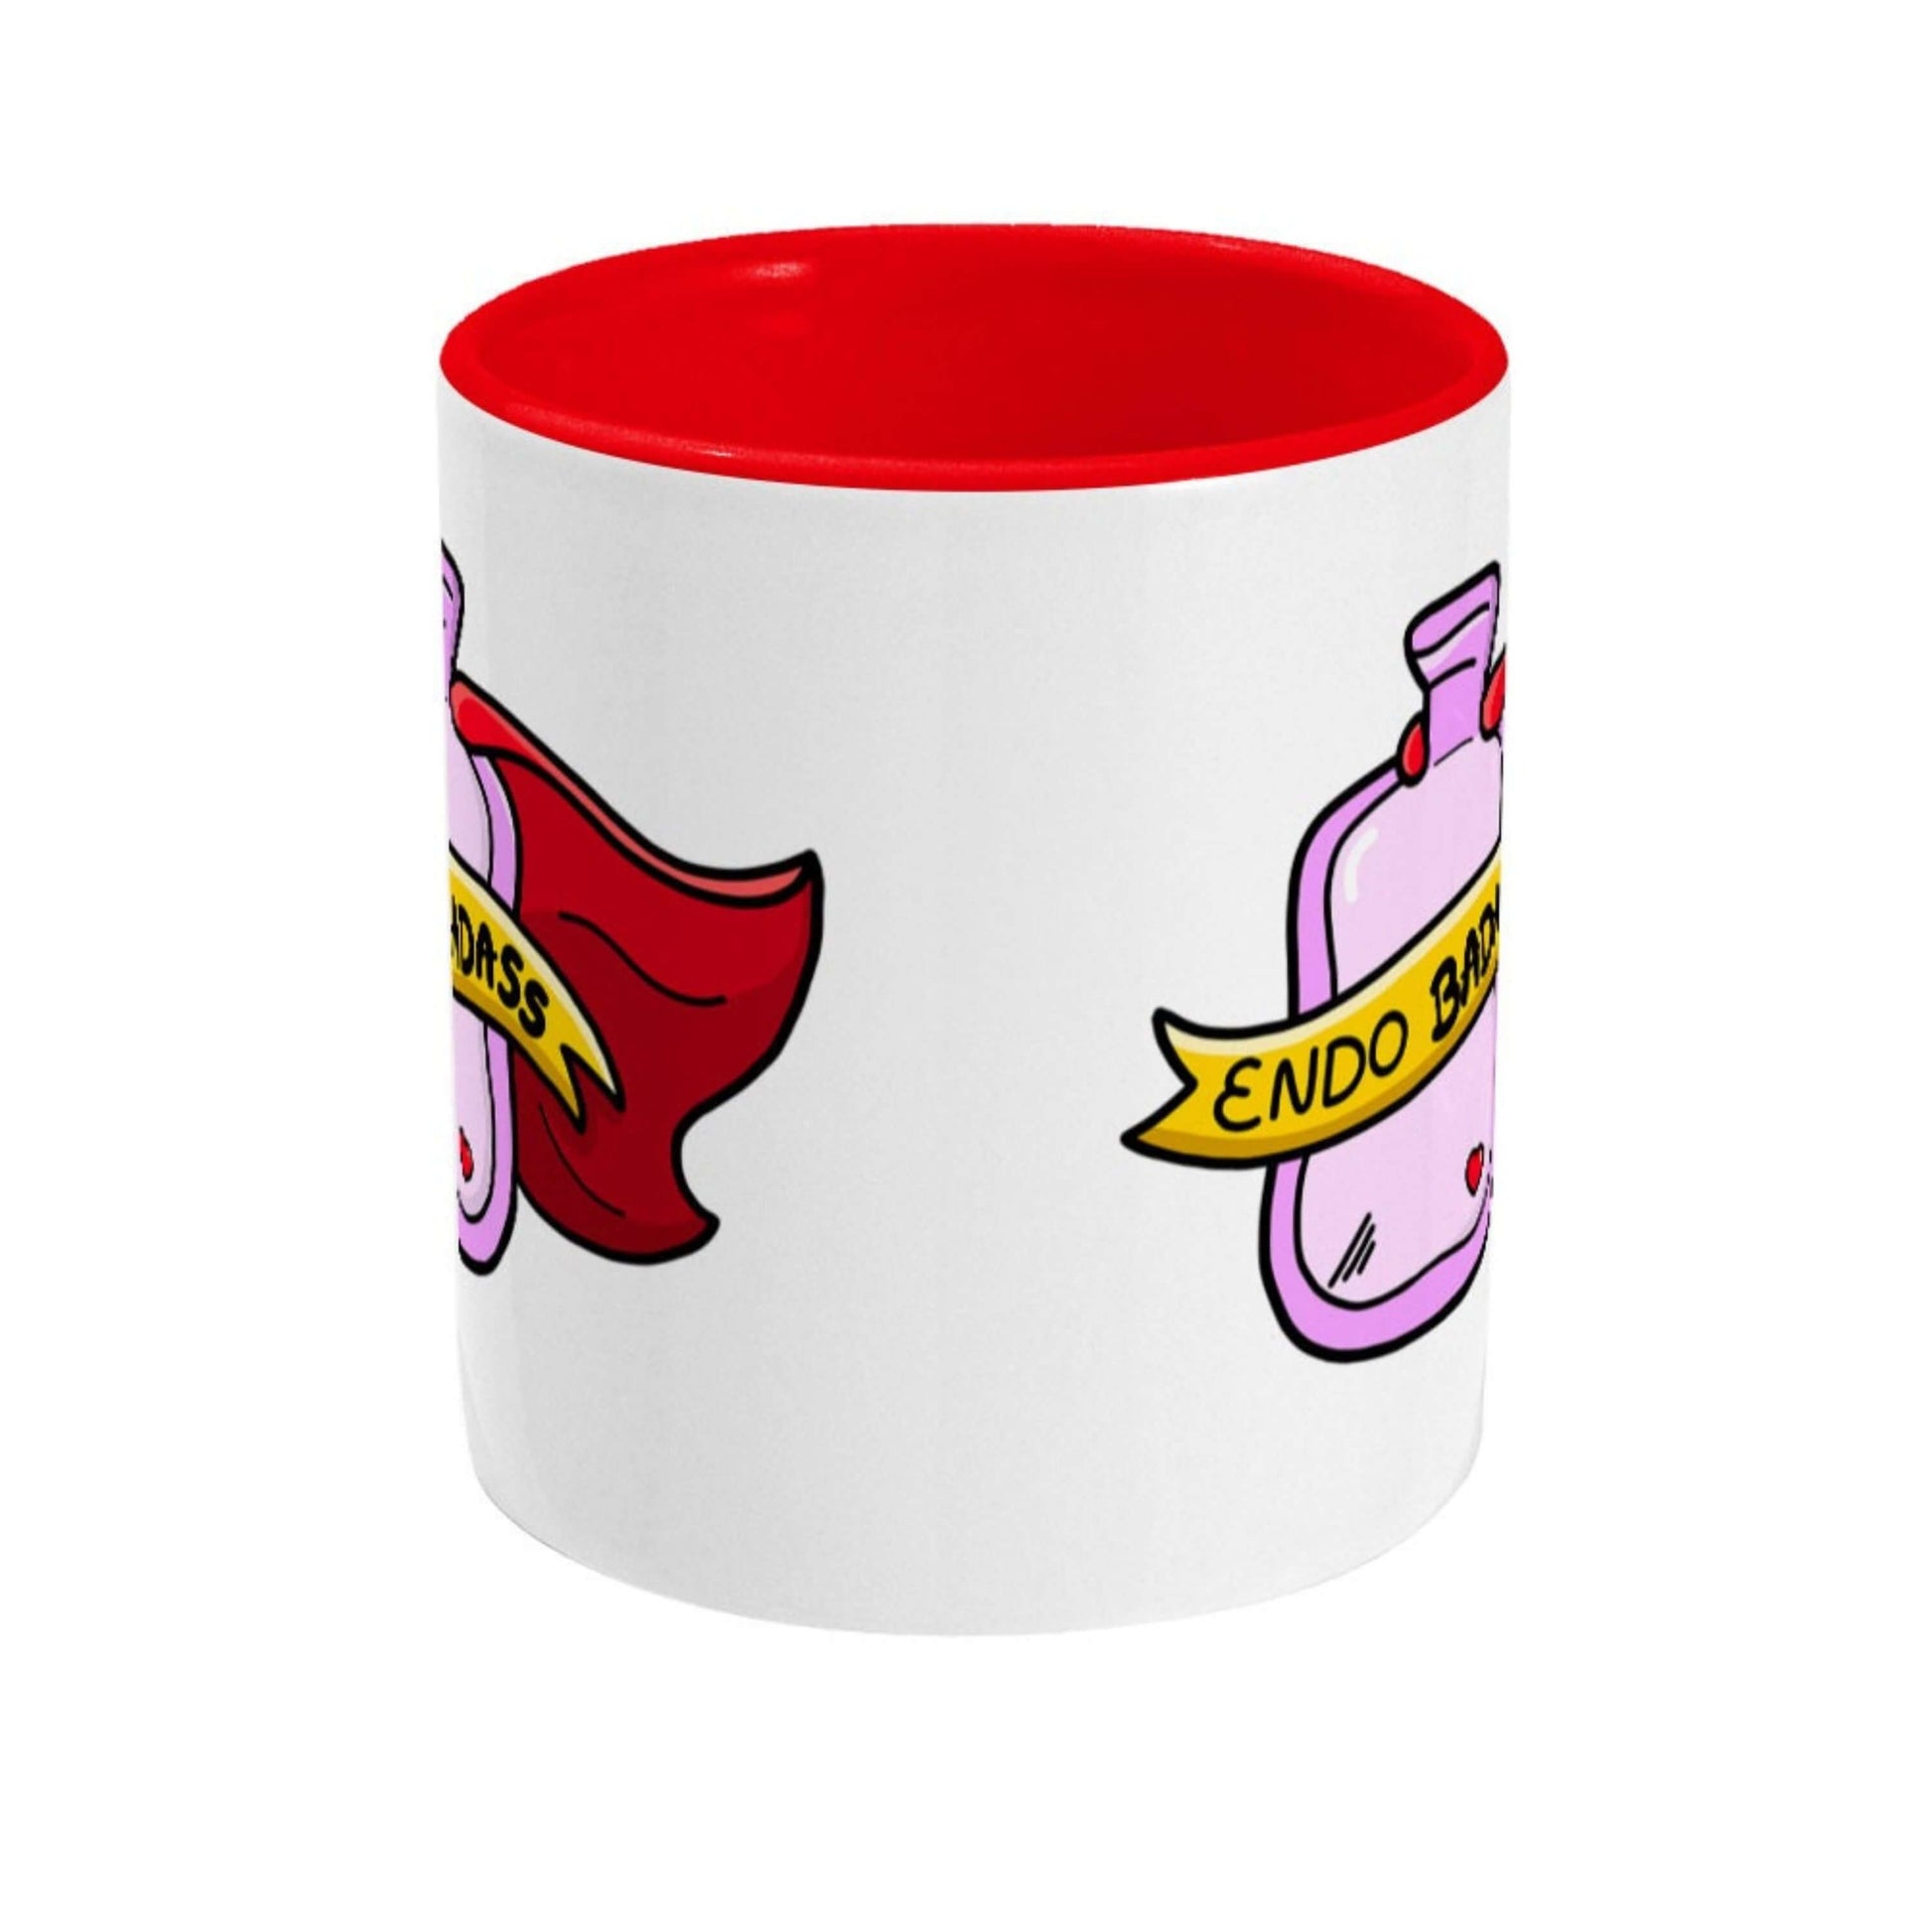 Endo Badass Mug - Endometriosis shown on a white background. The white mug has a red handle and inside with an illustration of a pink hot water bottle wearing a red cape. There is a yellow banner across the bottle with black text inside that reads 'endo badass'. Hand drawn design made to raise awareness for endometriosis.